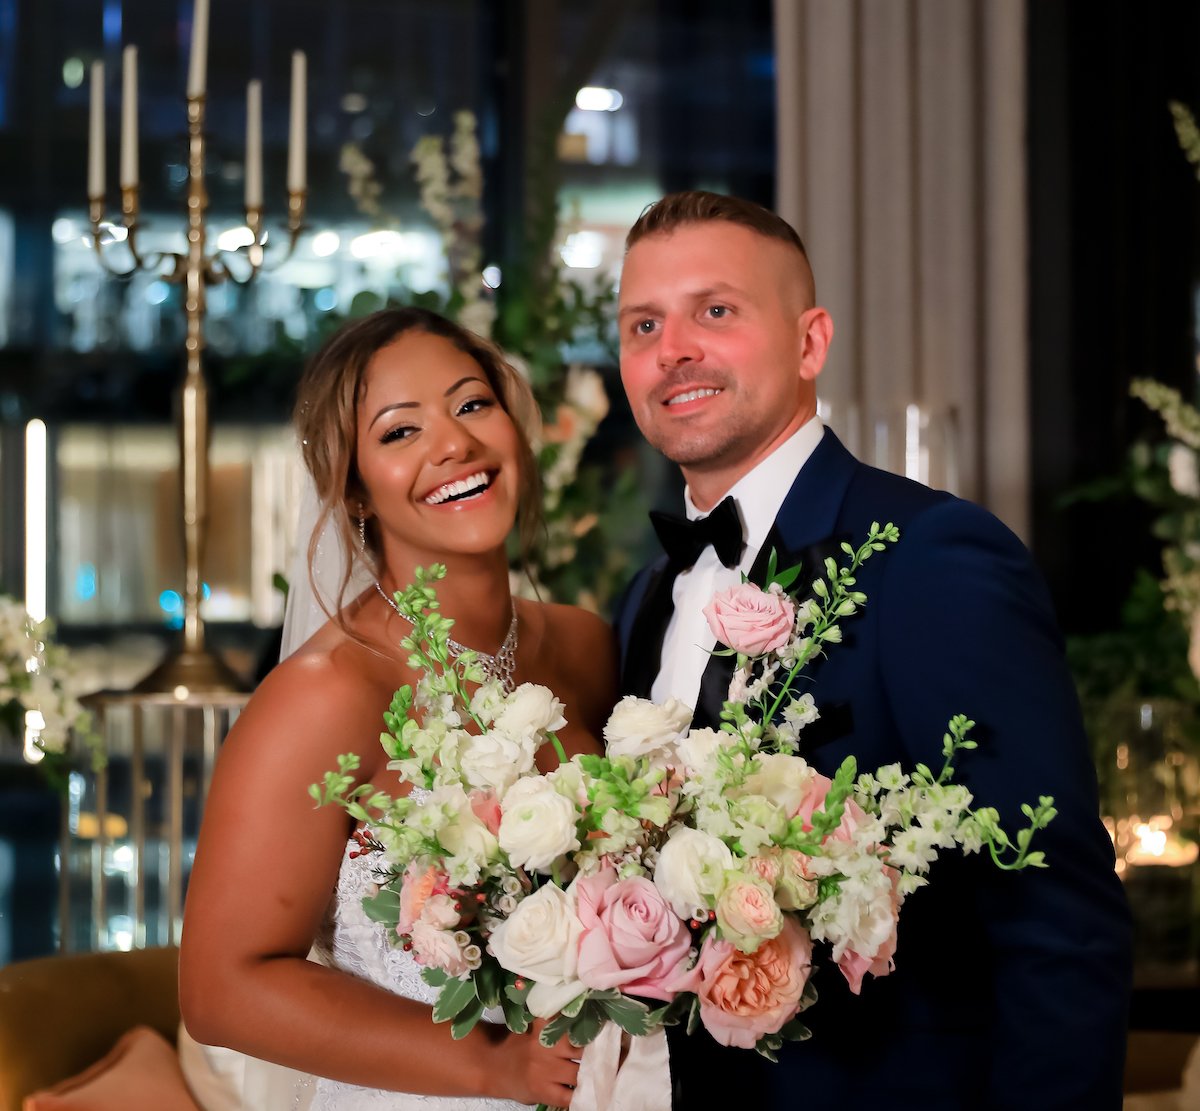 Domynique and Mackinley from 'Married at First Sight' Season 16 on their wedding day. 'MAFS' spoilers hint they break up before Decision Day.